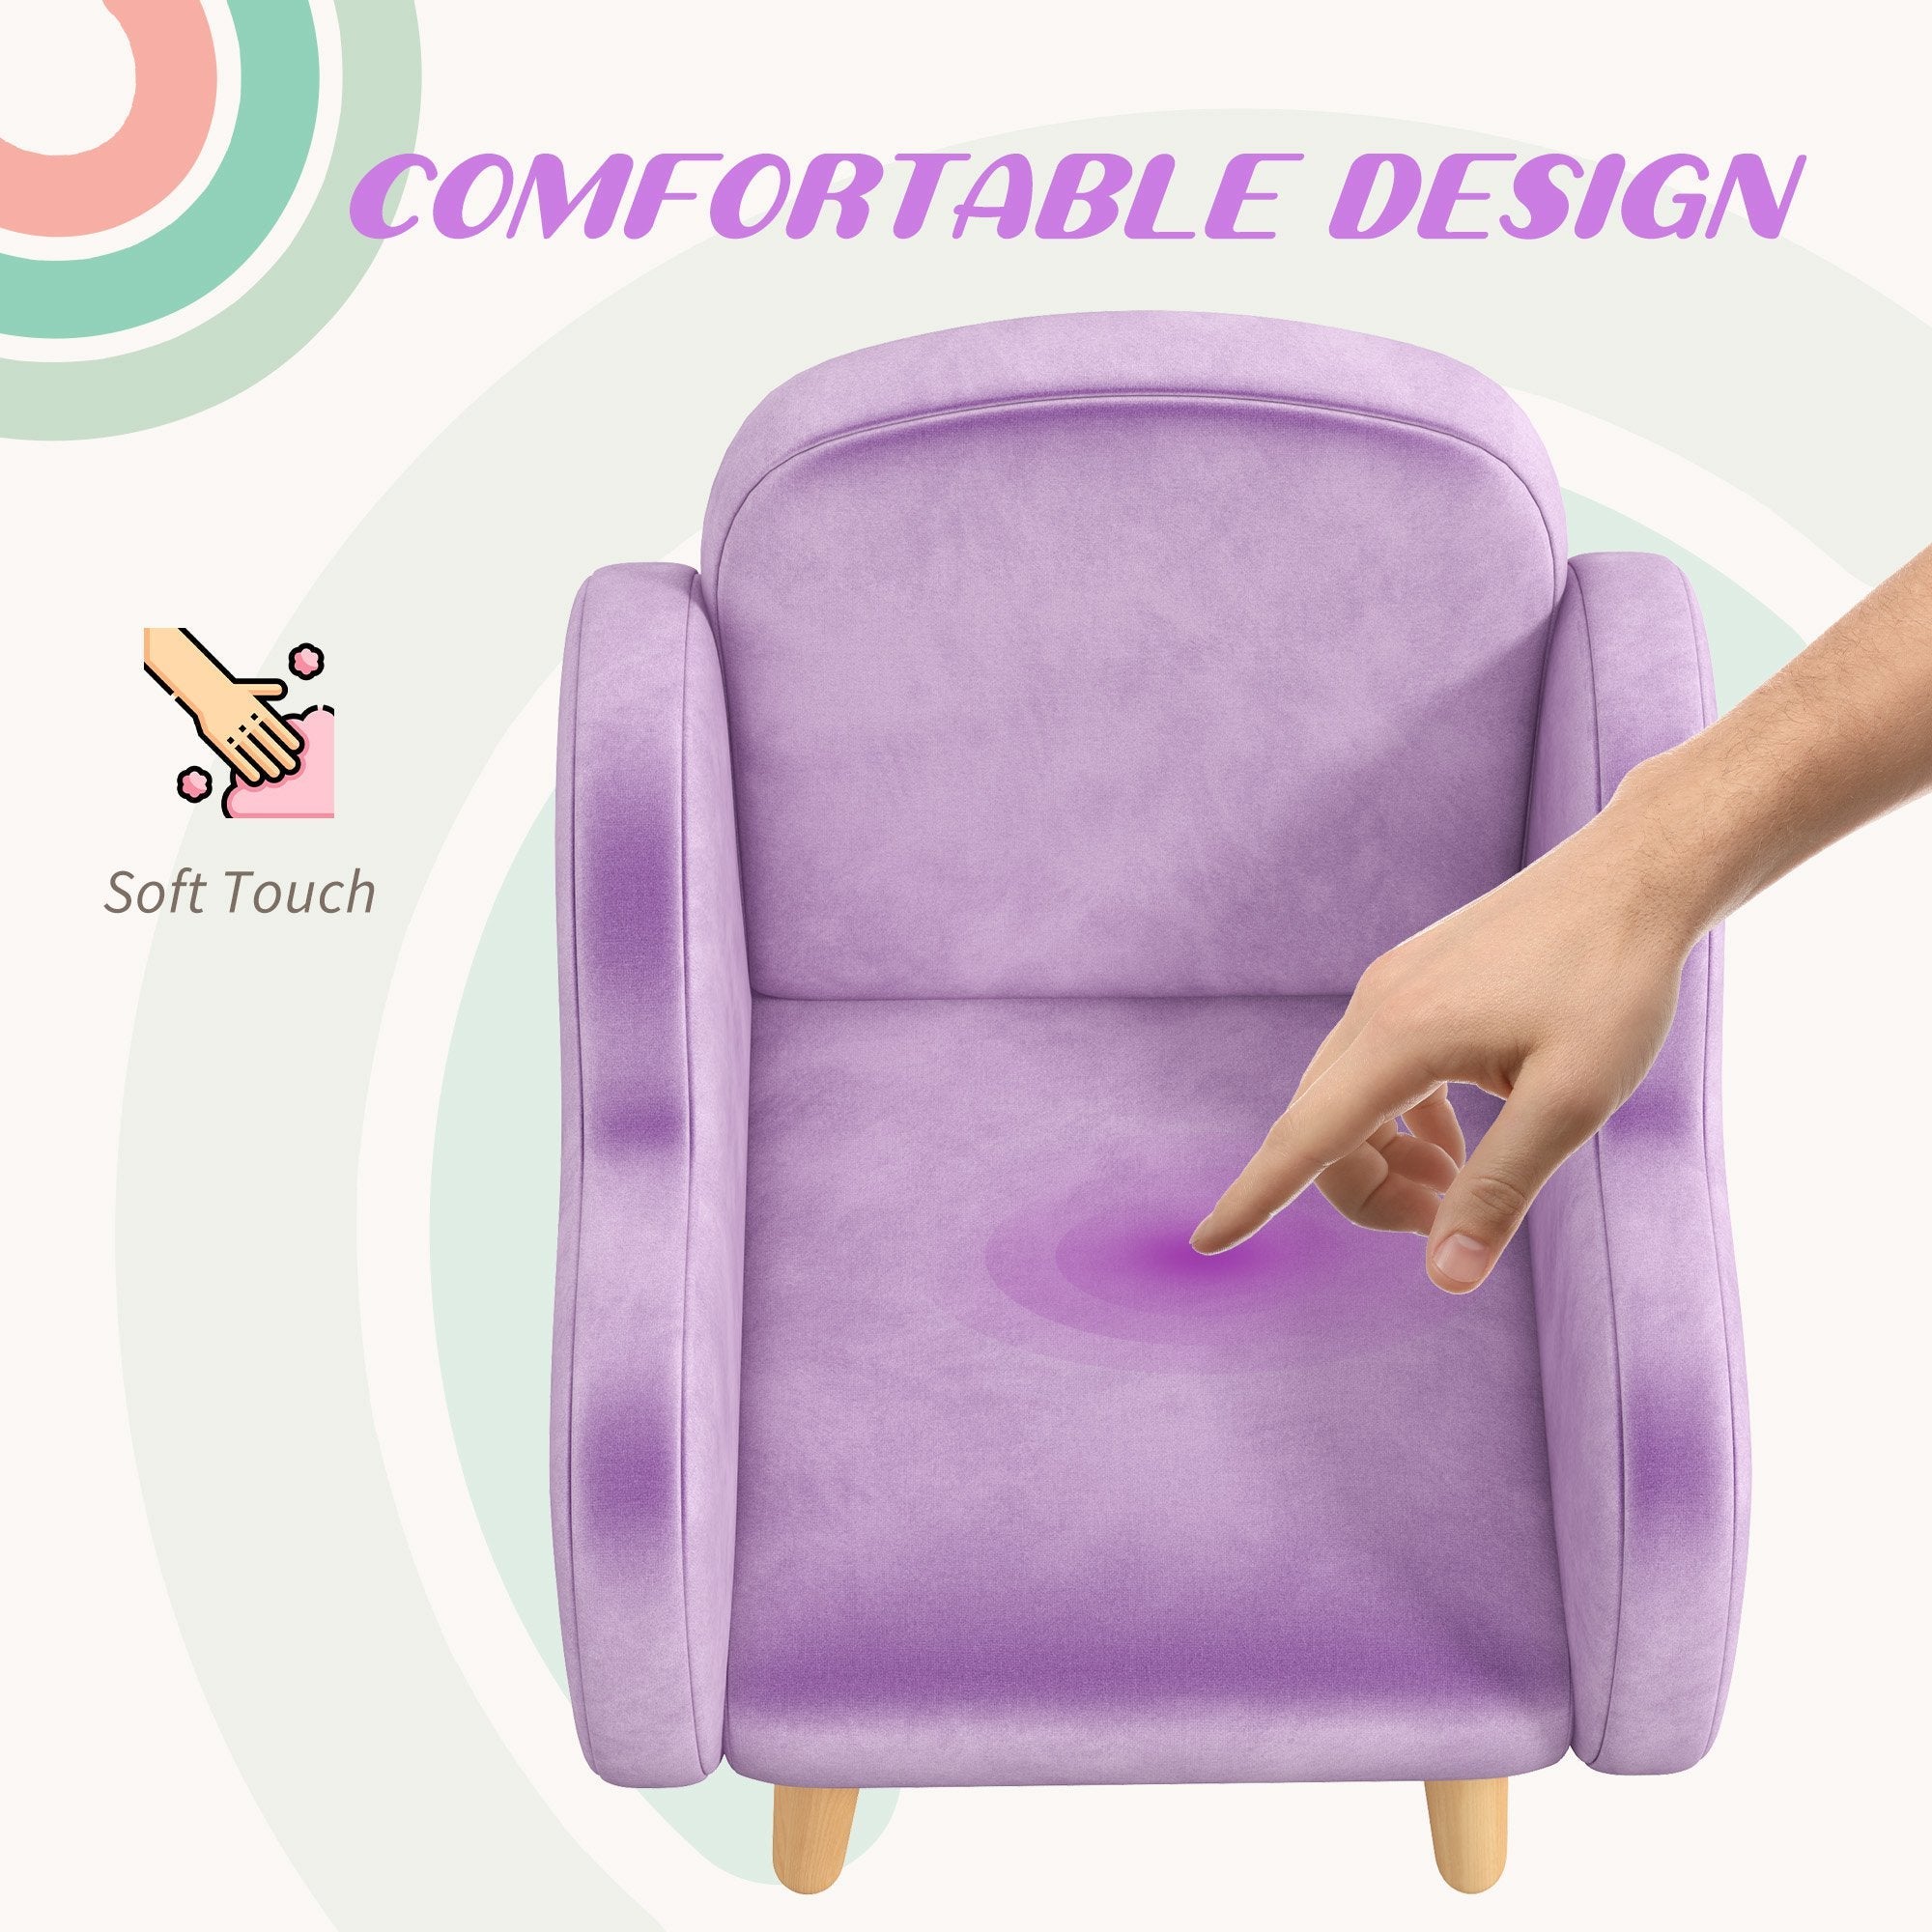 Cloud Shape Toddler Armchair, Ergonomically Designed Kids Chair, Comfy Children Playroom Mini Sofa for Relaxing, for Ages 1.5-5 Years - Purple-4